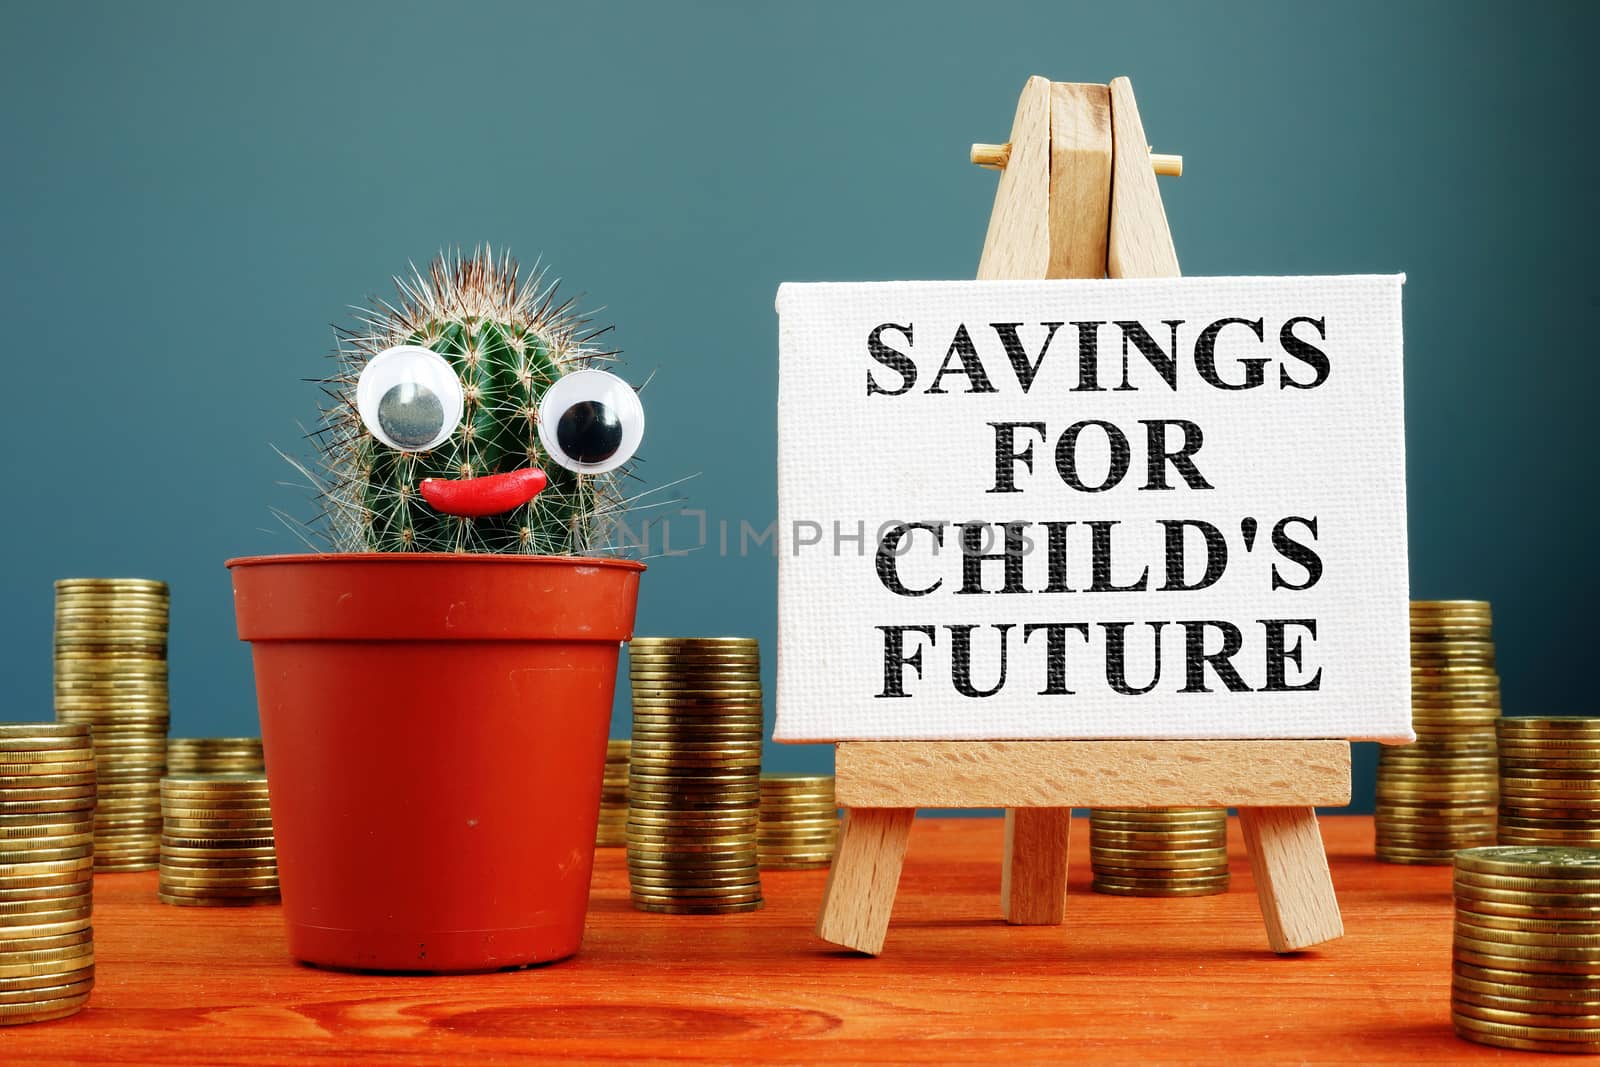 Savings for childs future for college and cactus.